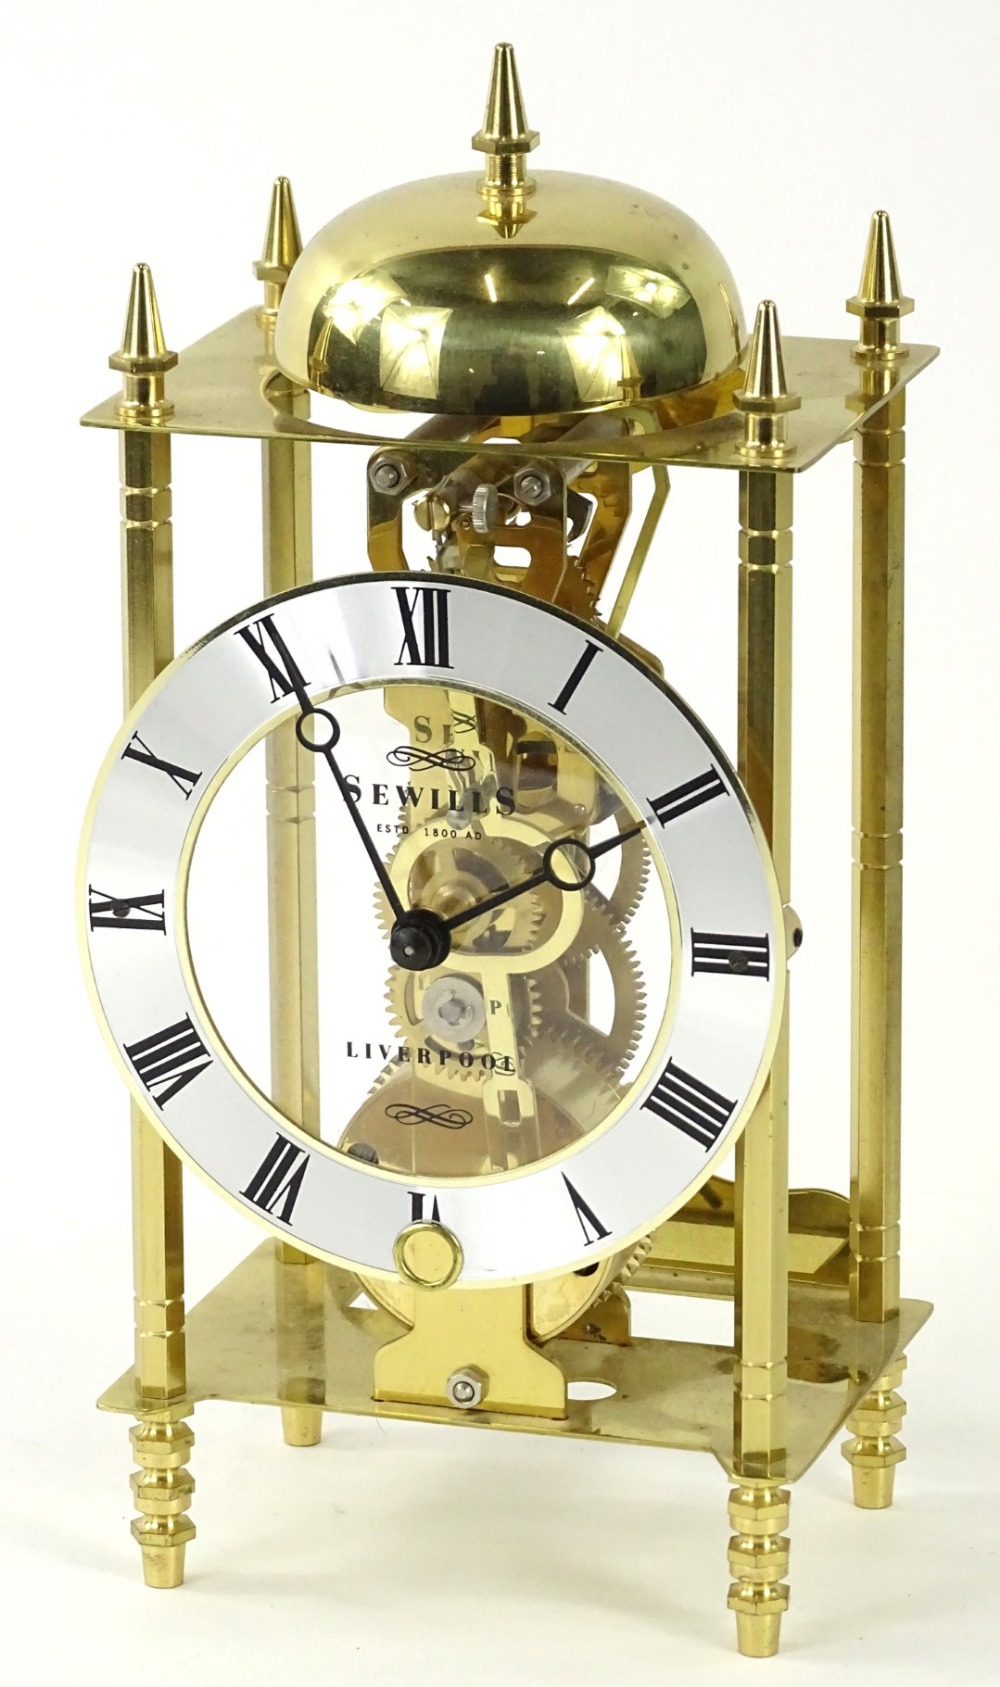 A Sewills of Liverpool brass skeleton clock, the silvered dial 23cm H.